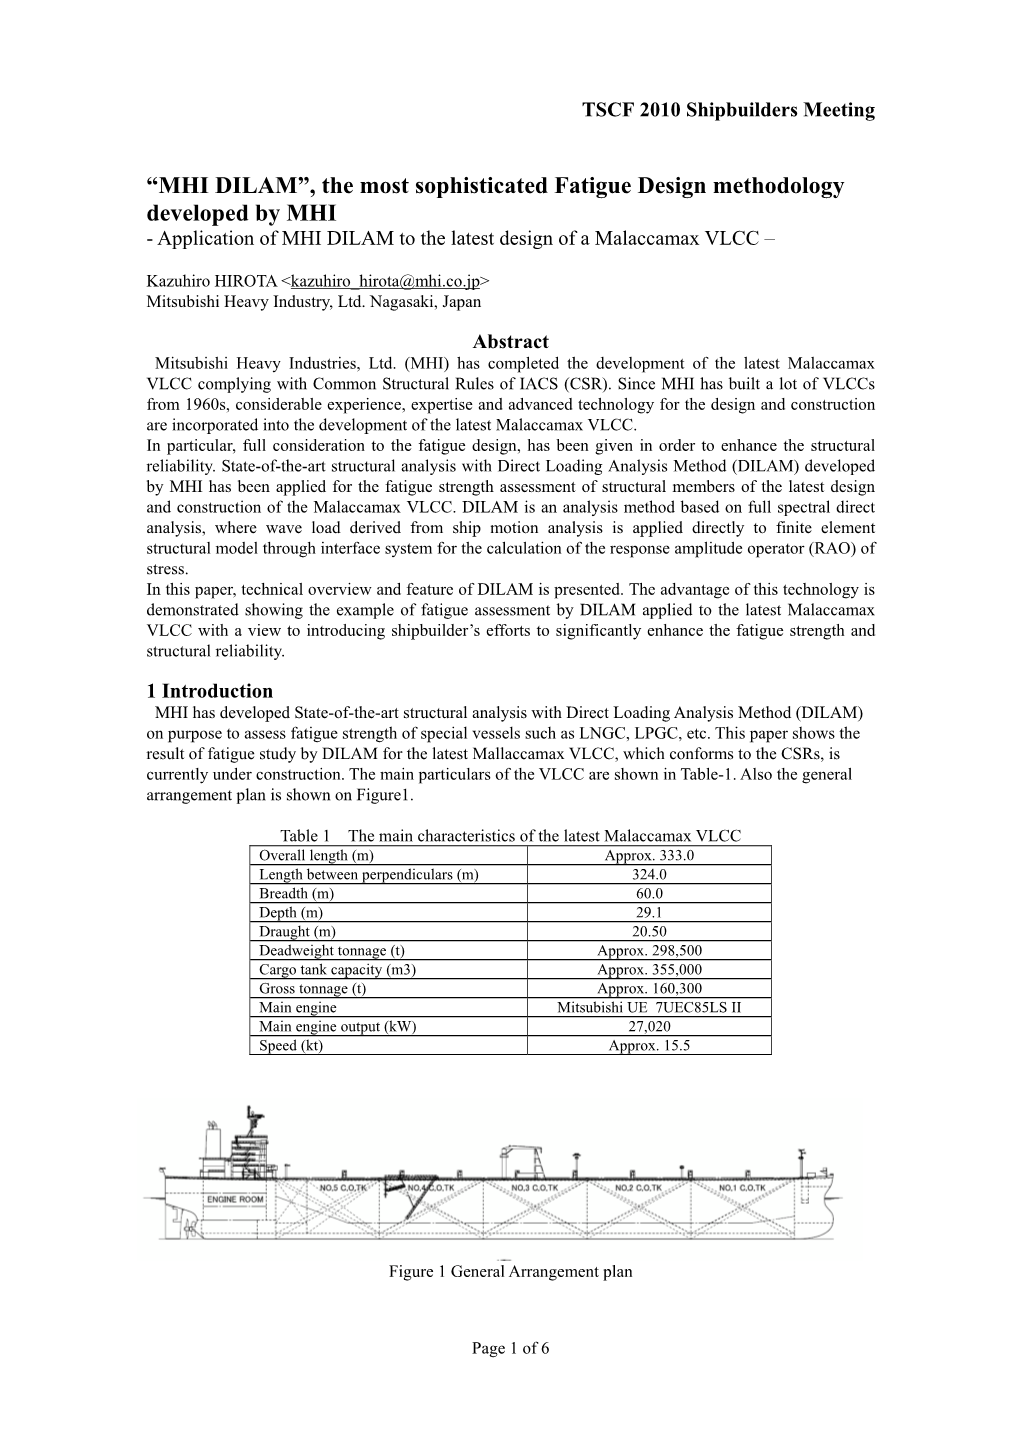 The Most Sophisticated Fatigue Design Methodology Developed by MHI - Application of MHI DILAM to the Latest Design of a Malaccamax VLCC –